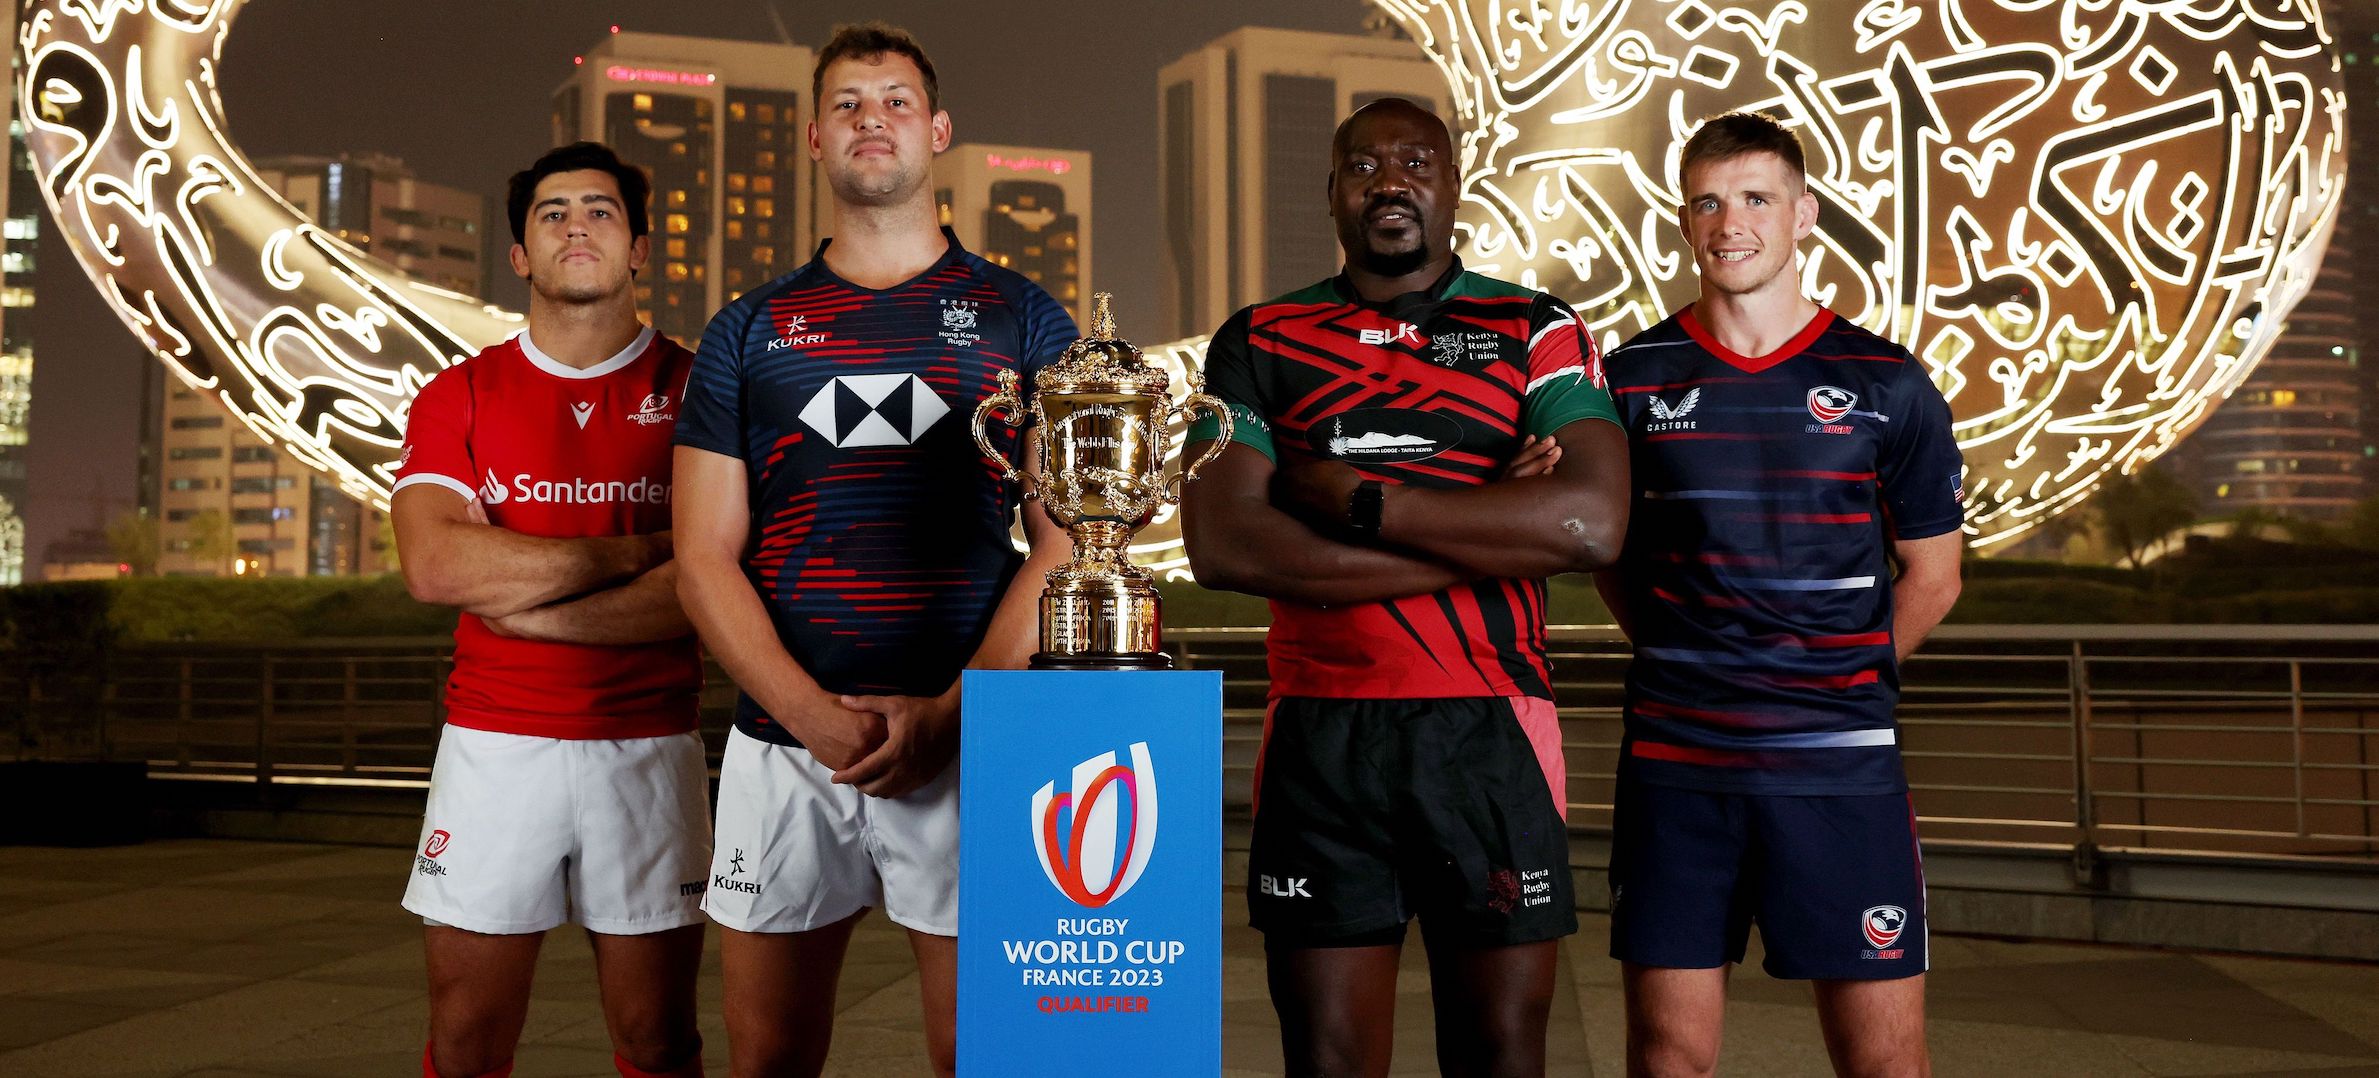 Final rugby world cup qualification tournament - captains photo